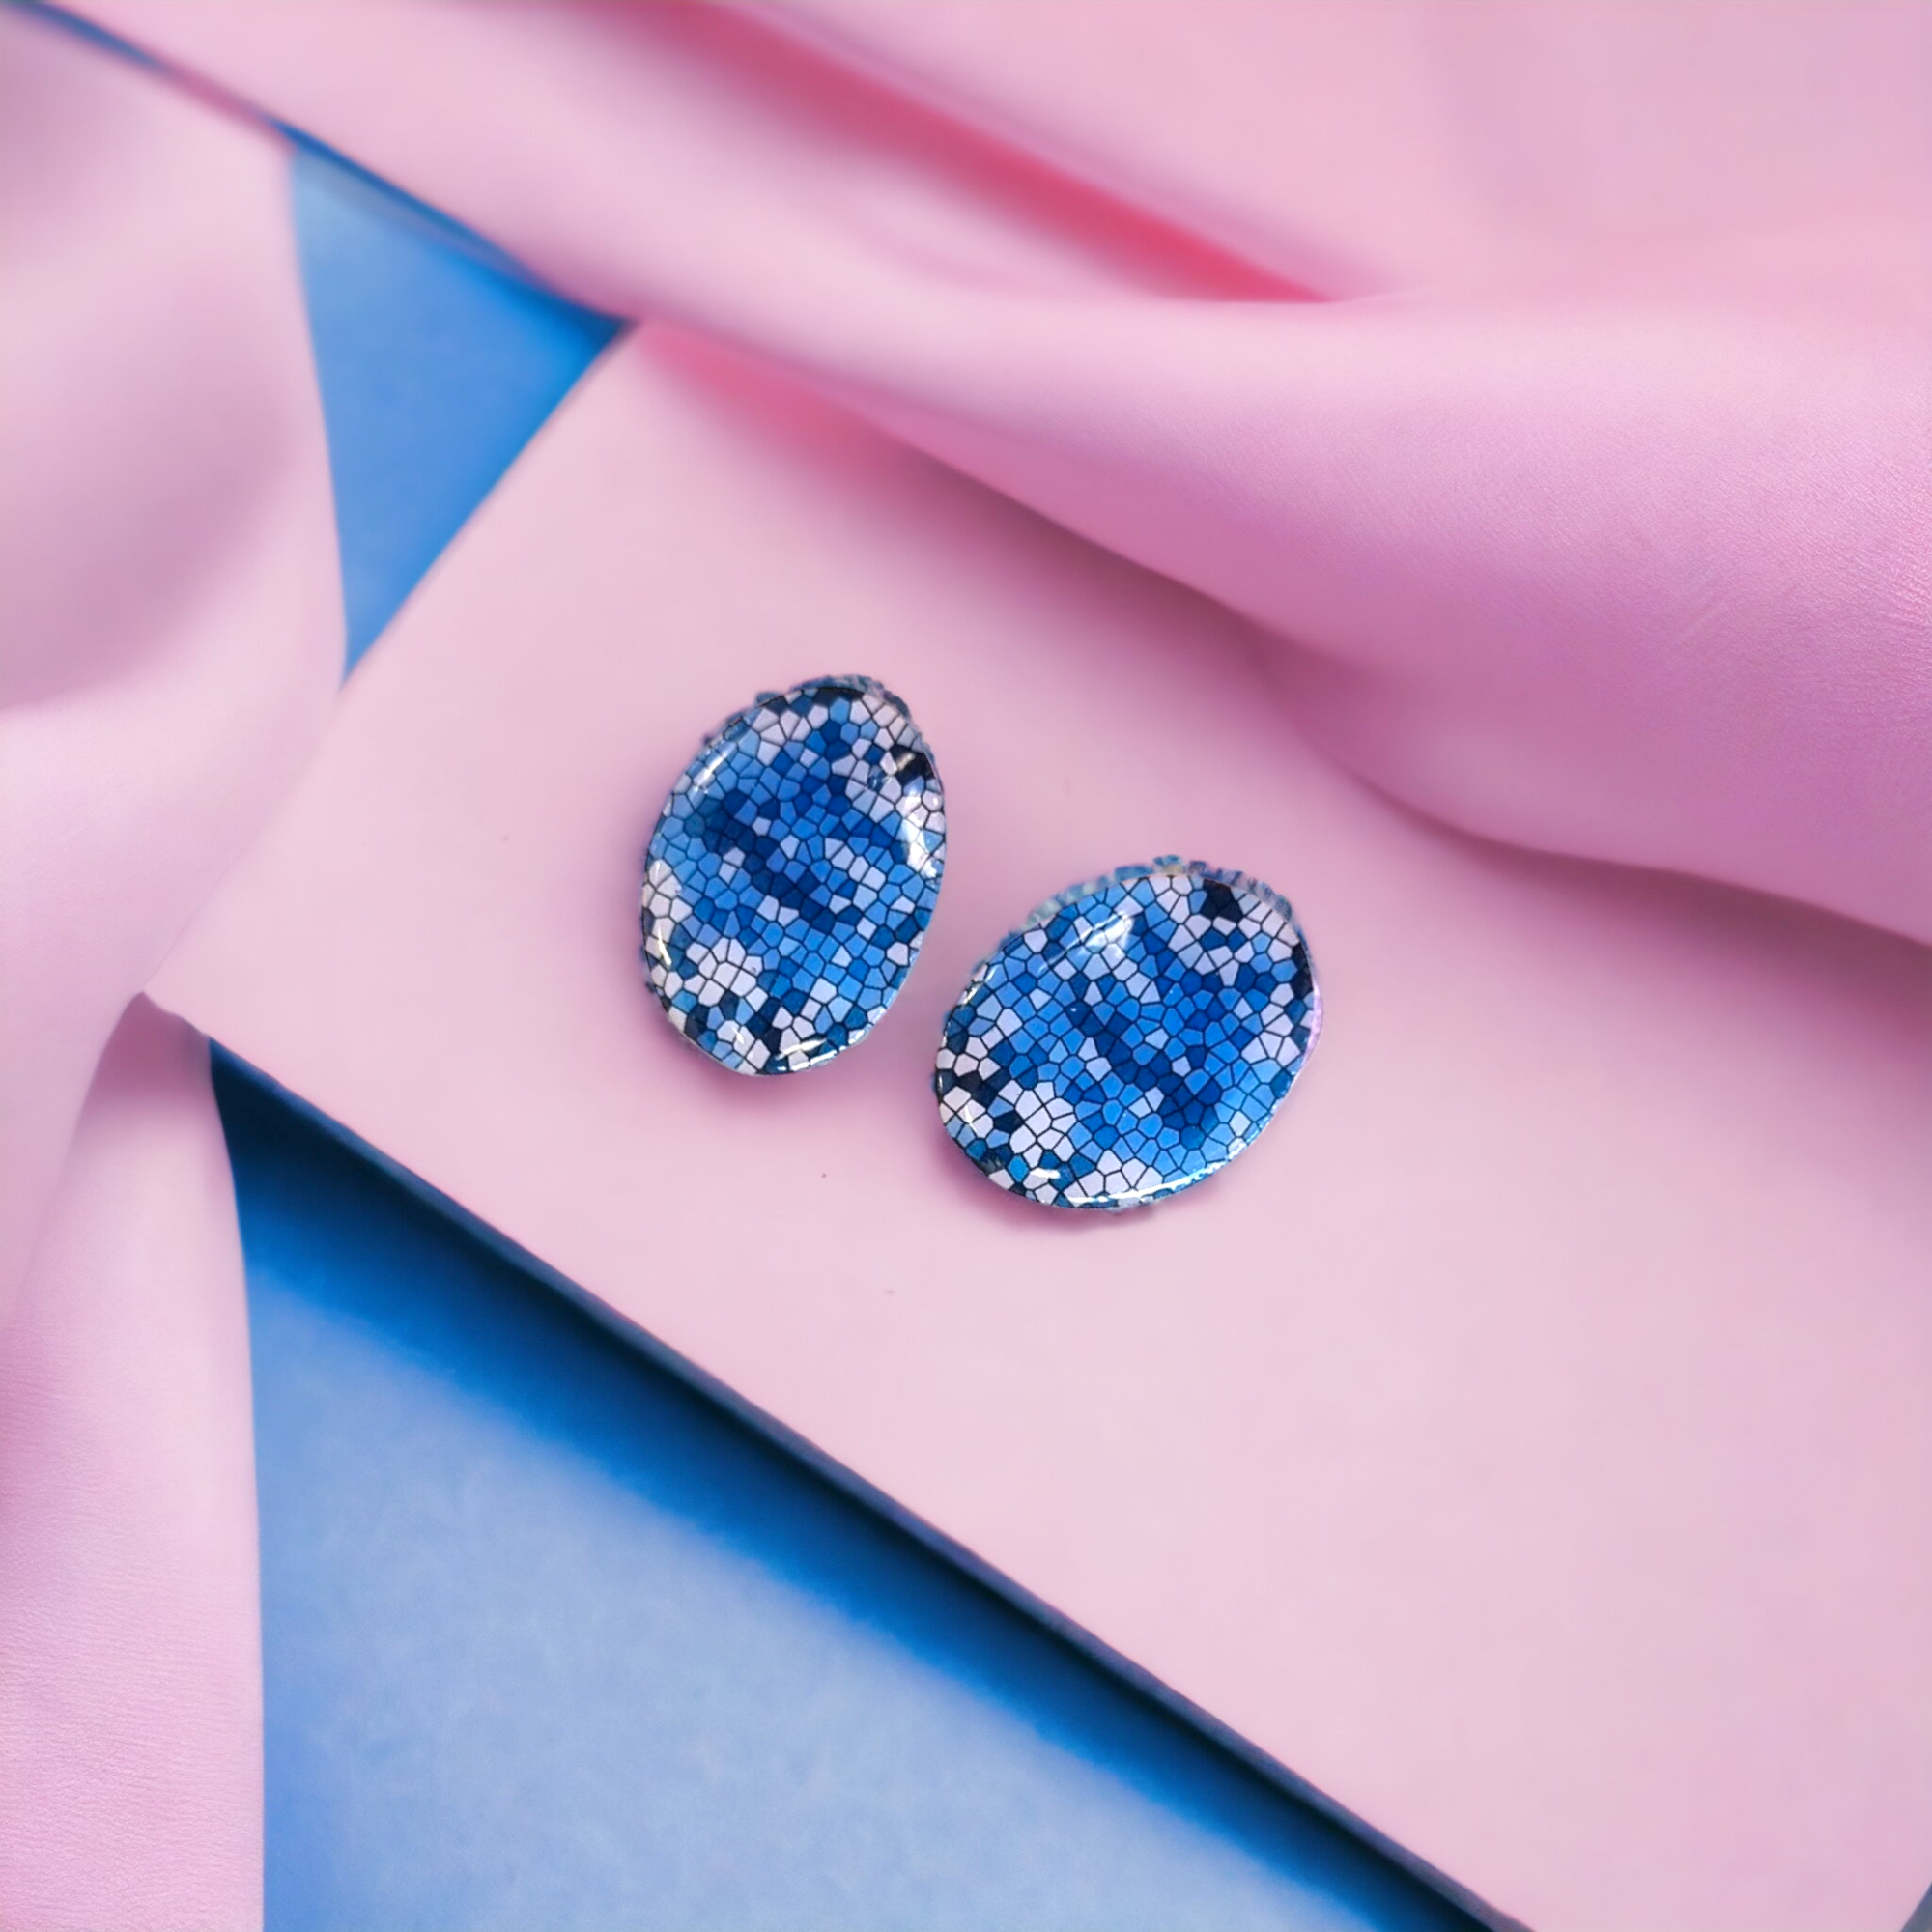 Statement Blue and White Funky Stud Earrings